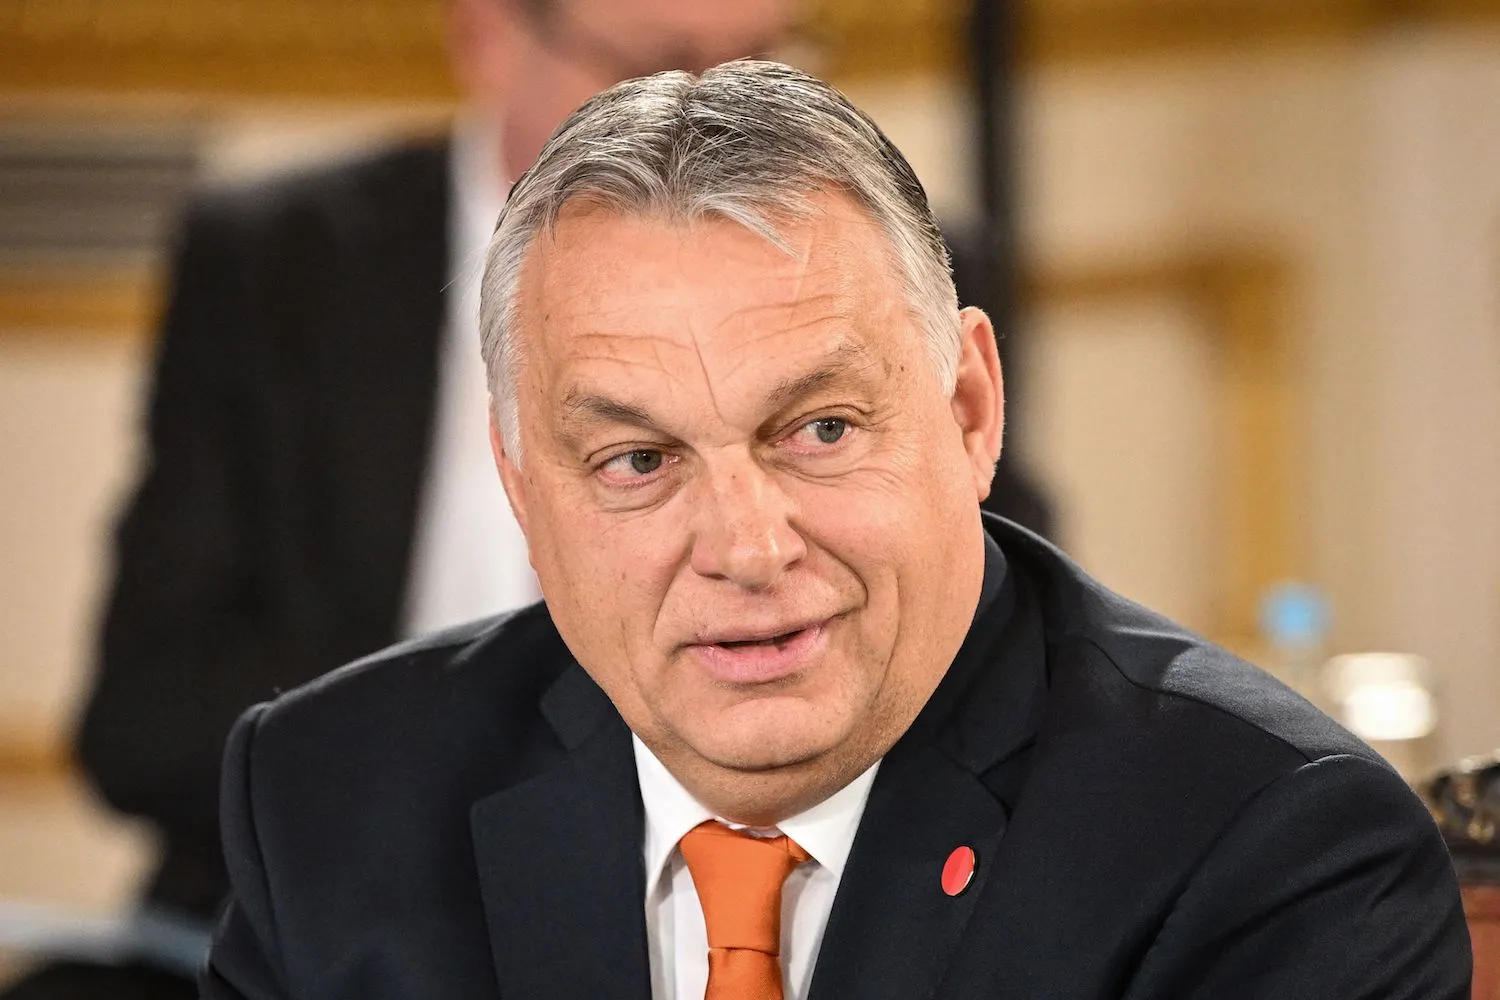 In 2010 Hungary made important decision - to go towards Azerbaijan, PM Orban says